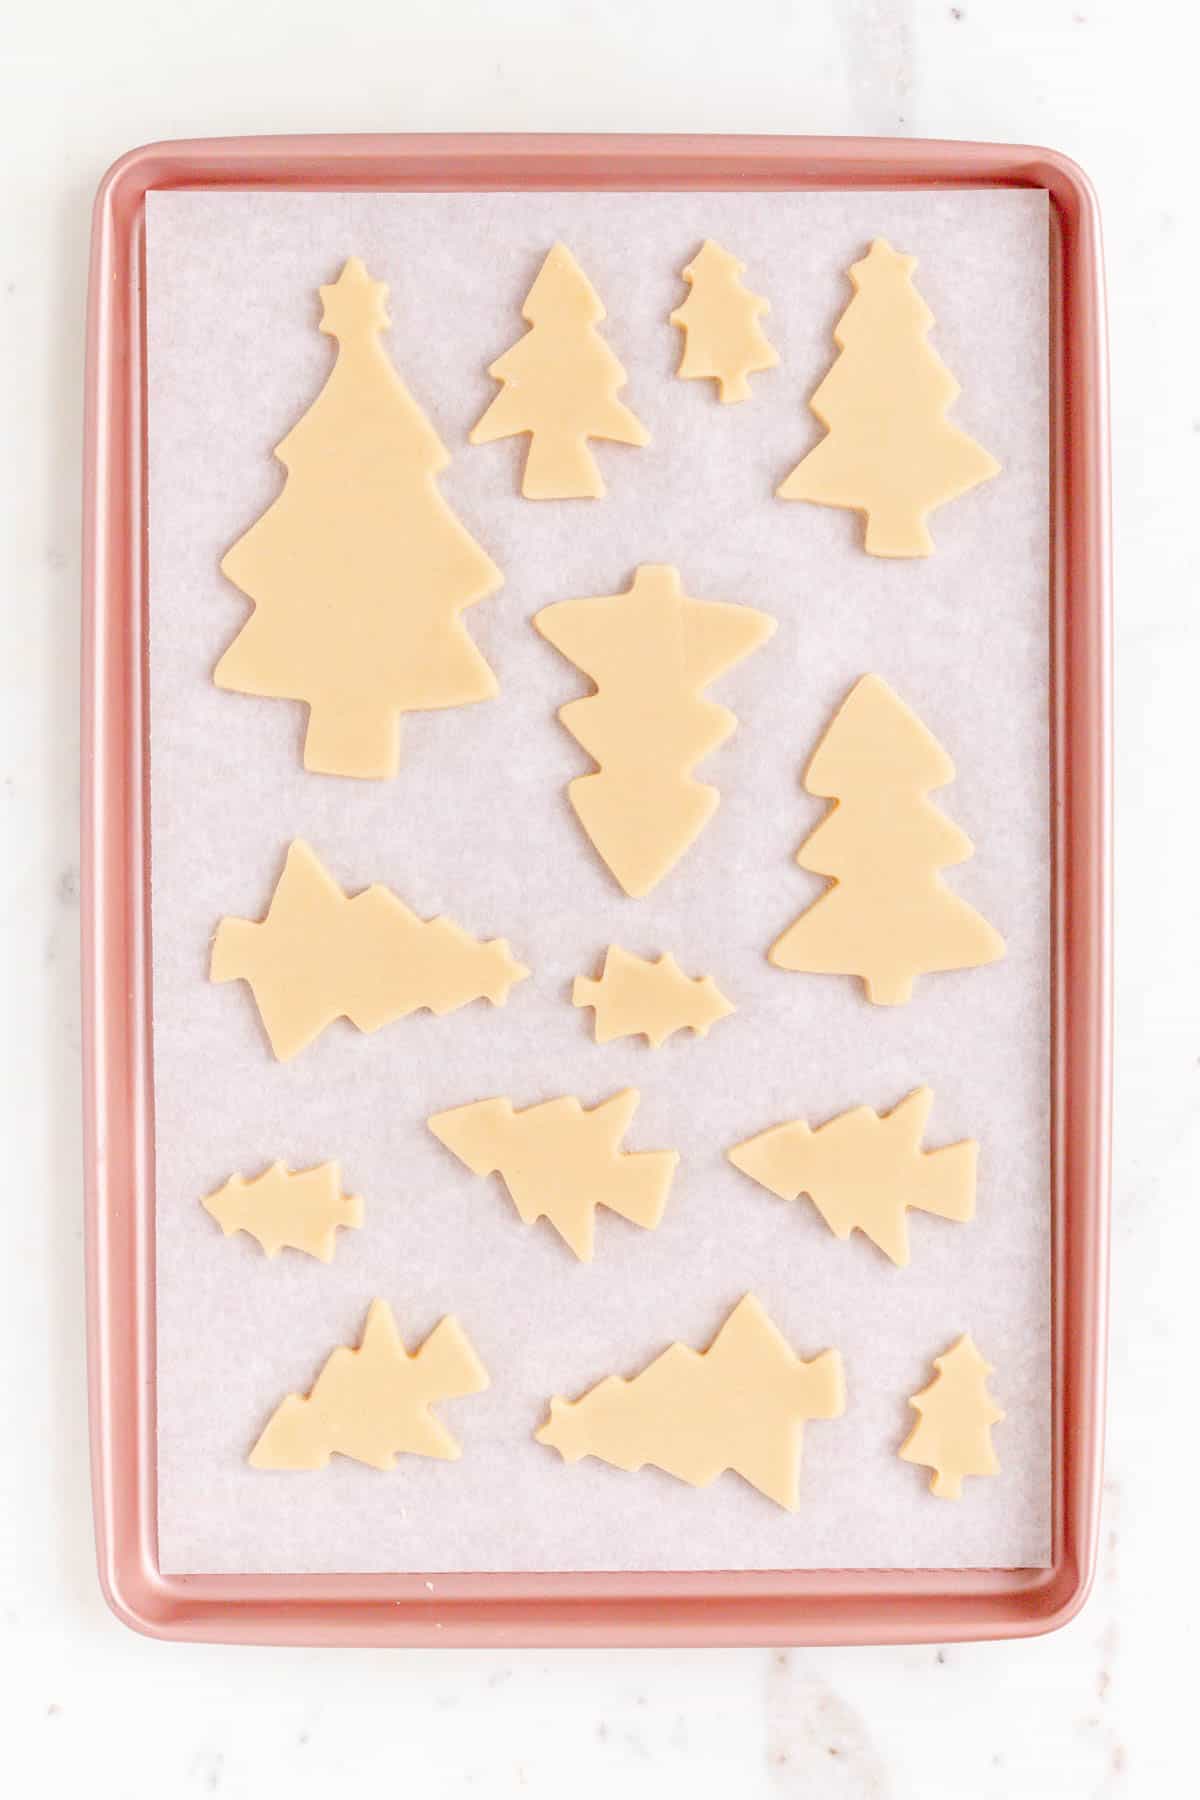 Cut out Christmas tree sugar cookies spaced out on parchment on a pink baking sheet